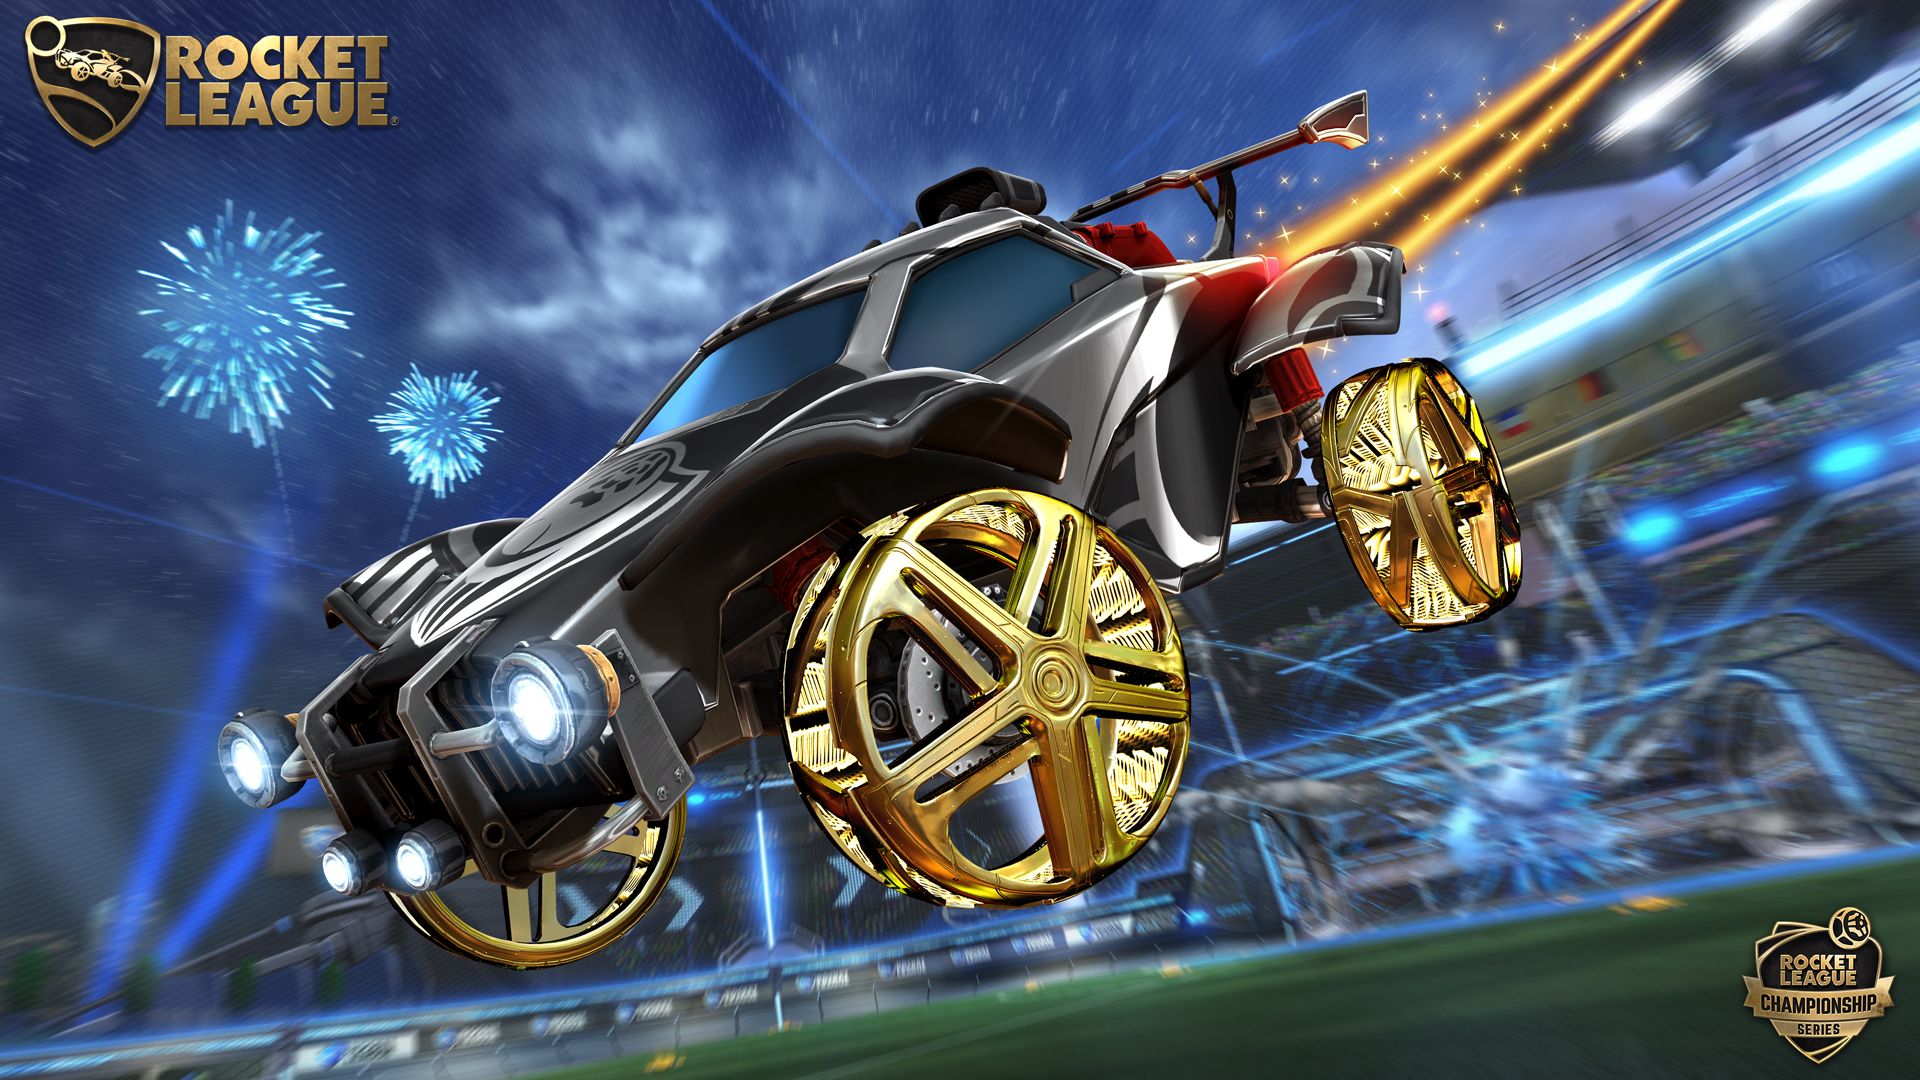 Grab Your Tickets to the Season 8 Rocket League World Championship